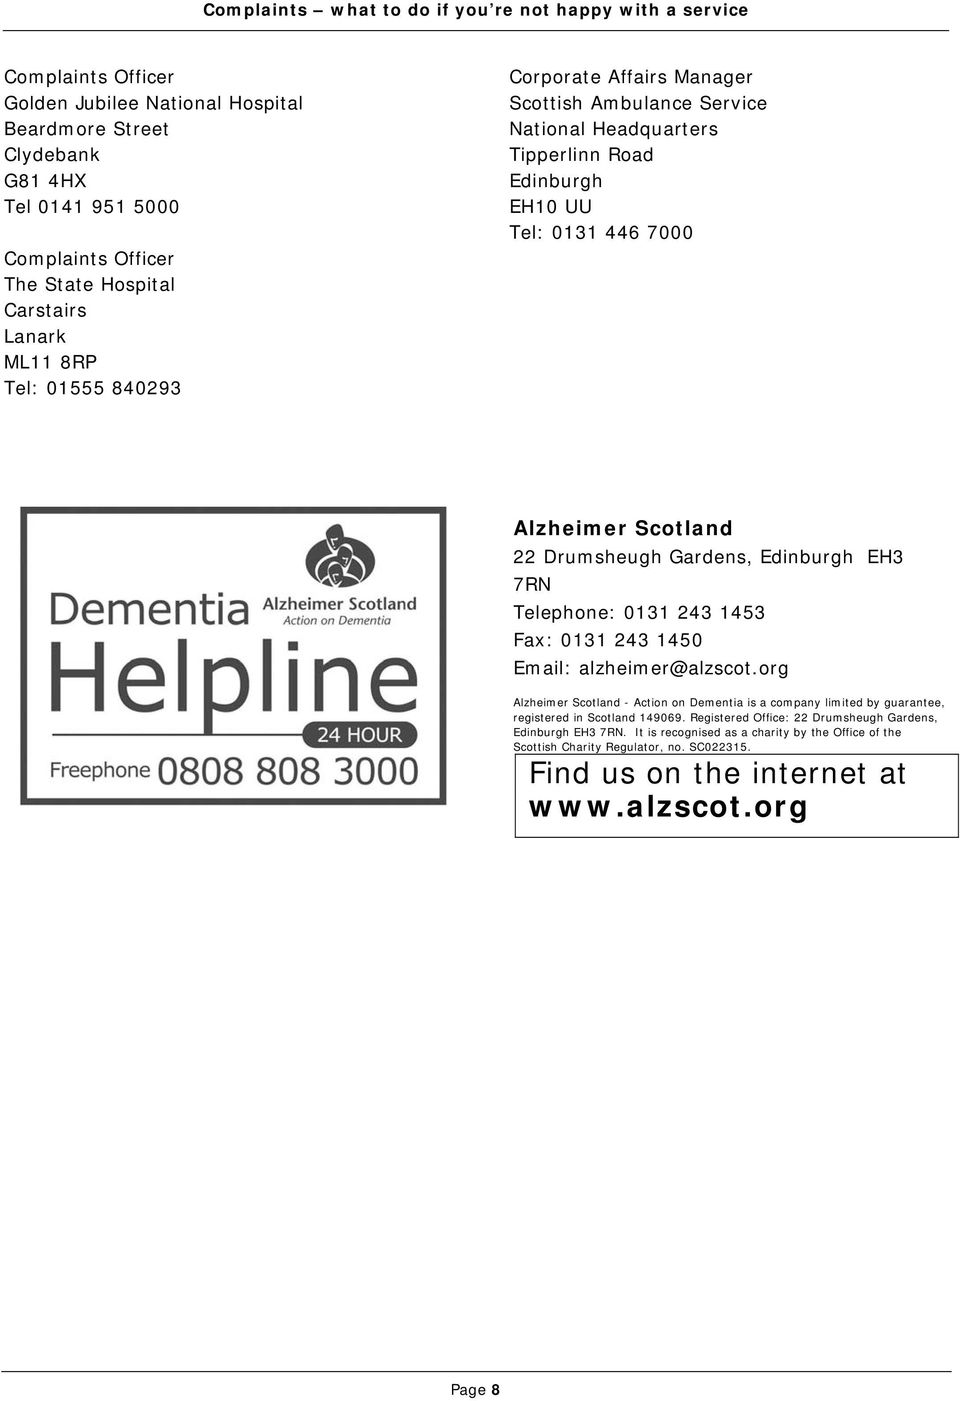 Telephone: 0131 243 1453 Fax: 0131 243 1450 Email: alzheimer@alzscot.org Alzheimer Scotland - Action on Dementia is a company limited by guarantee, registered in Scotland 149069.